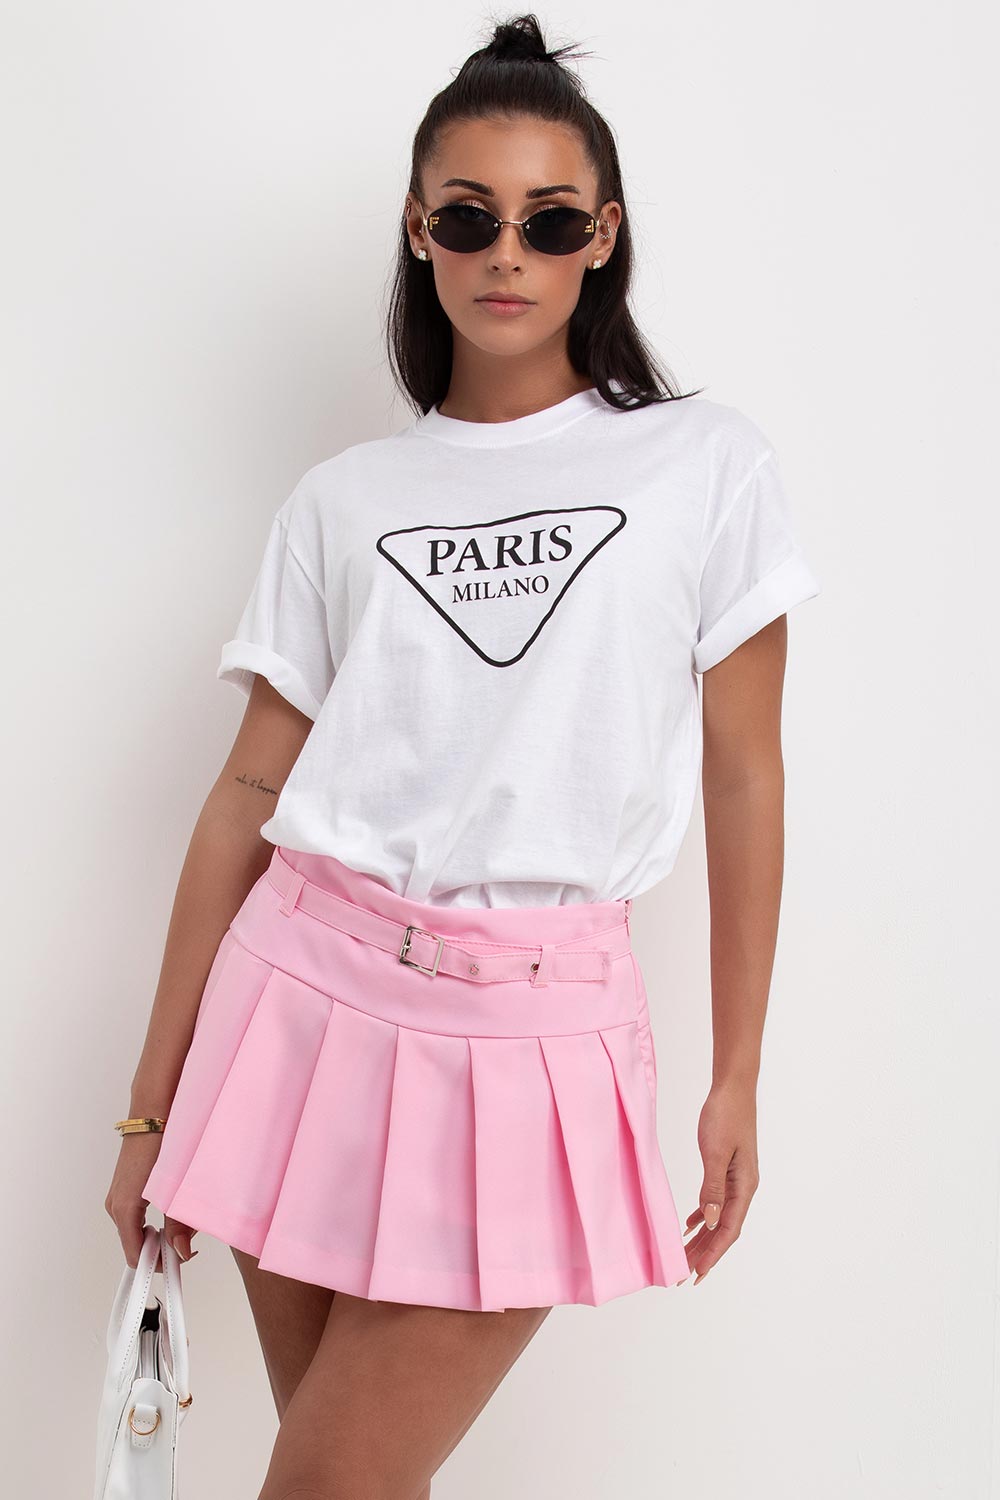 baby pink pleated mini skorts tennis skirt summer festival rave outfit